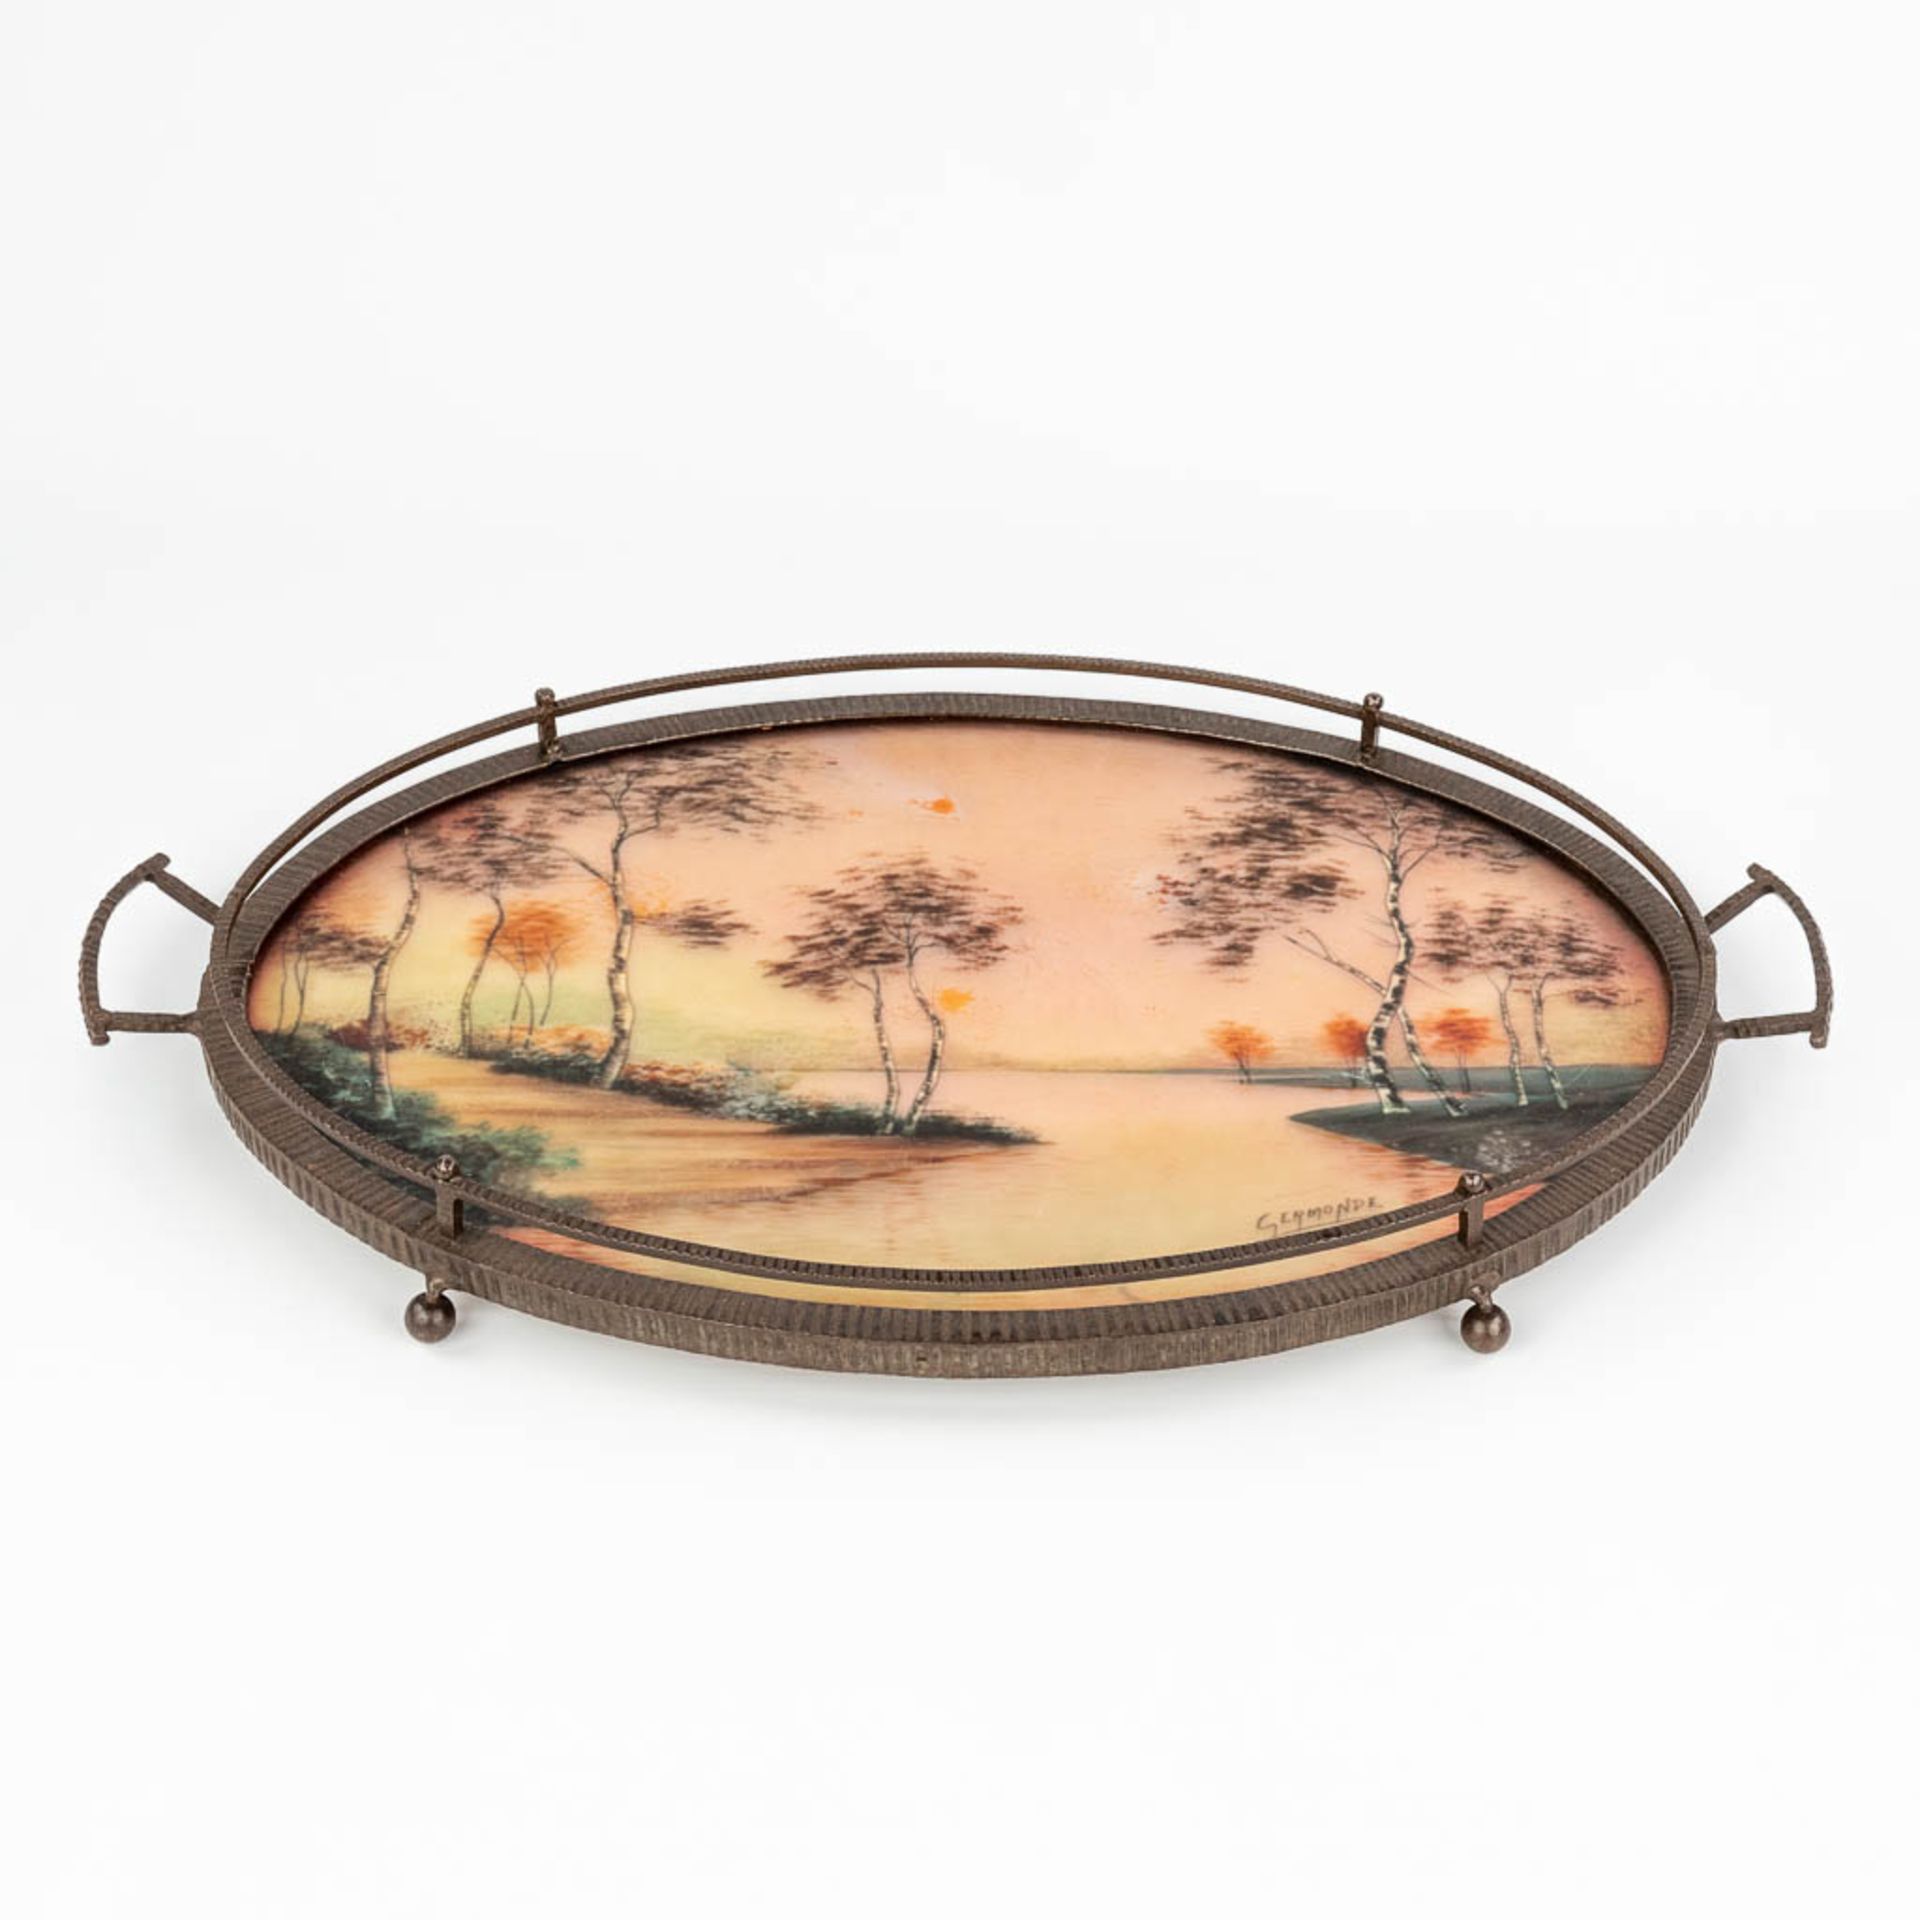 Germonde, a wrought iron and reverse glass painting serving tray in art deco style. Circa 1920. (L: